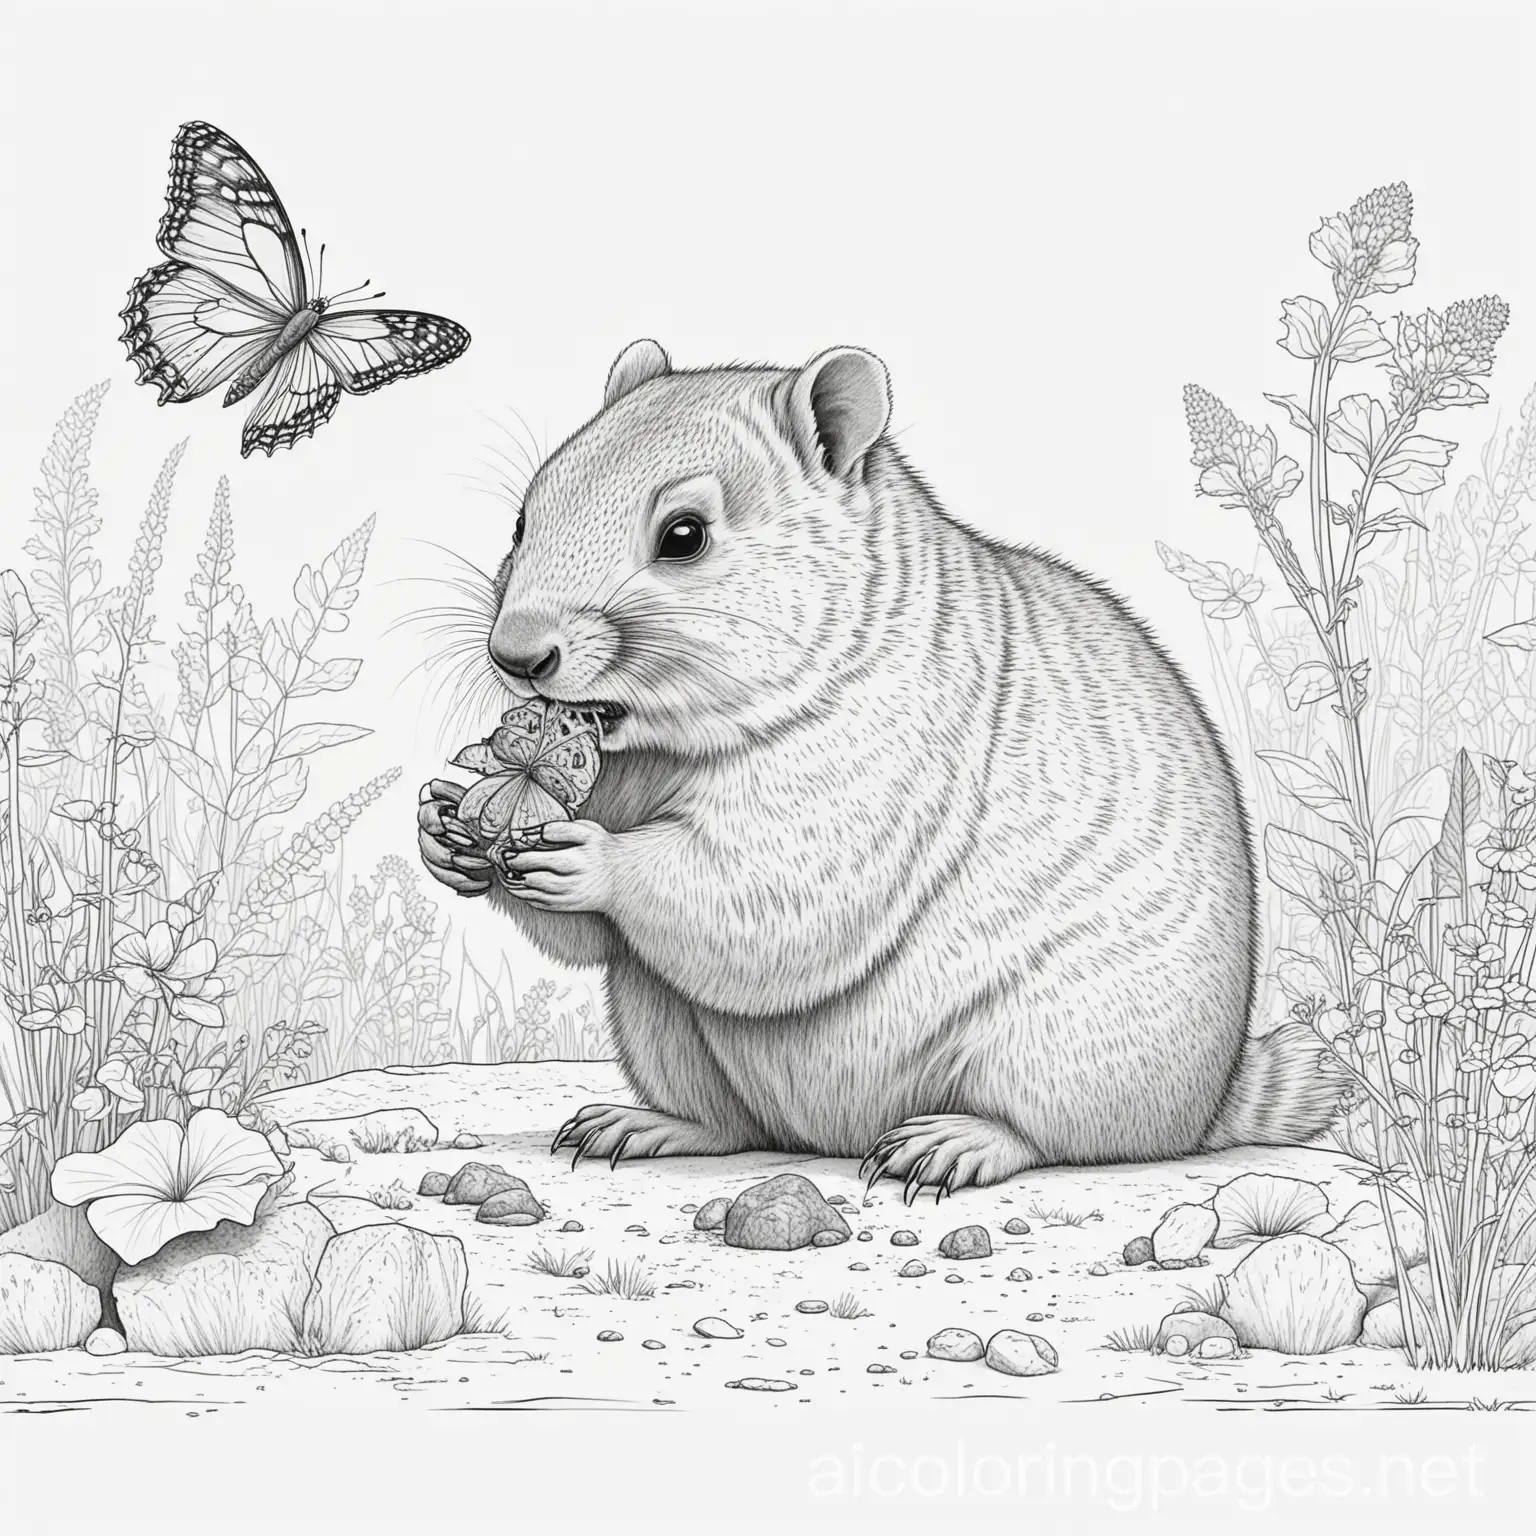 ground hog eating a butterfly, Coloring Page, black and white, line art, white background, Simplicity, Ample White Space. The background of the coloring page is plain white to make it easy for young children to color within the lines. The outlines of all the subjects are easy to distinguish, making it simple for kids to color without too much difficulty